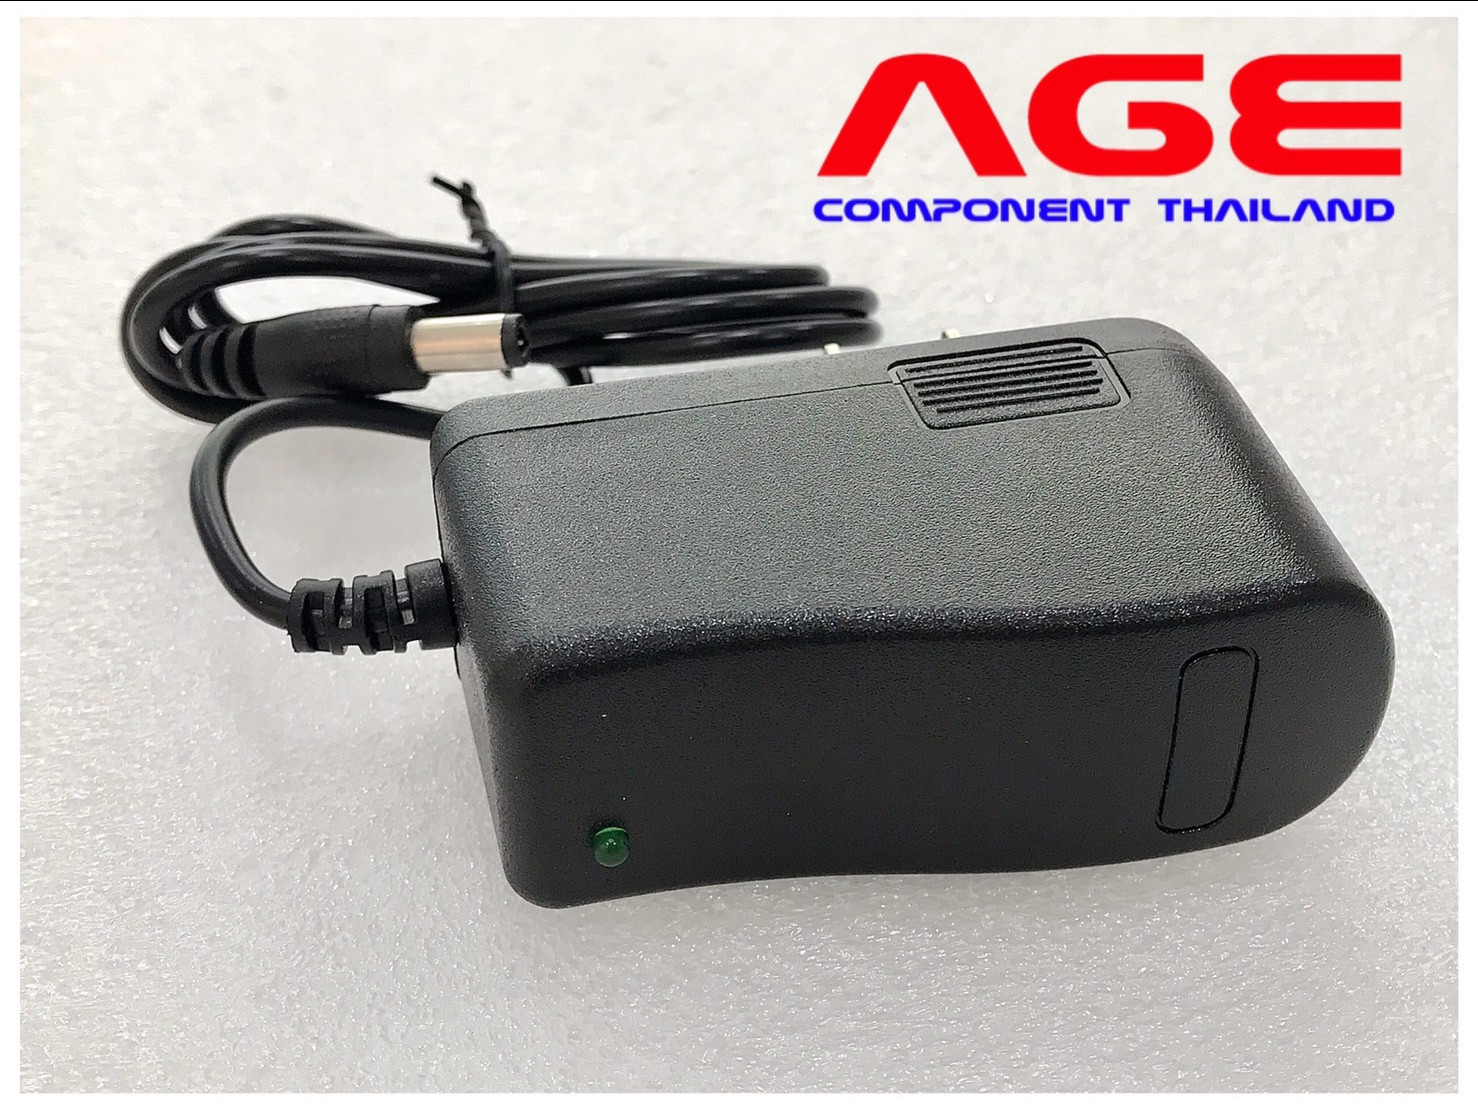 Buy the OEM External HDD Power Adapter Output: 12V 2A (5.5x2.5mm